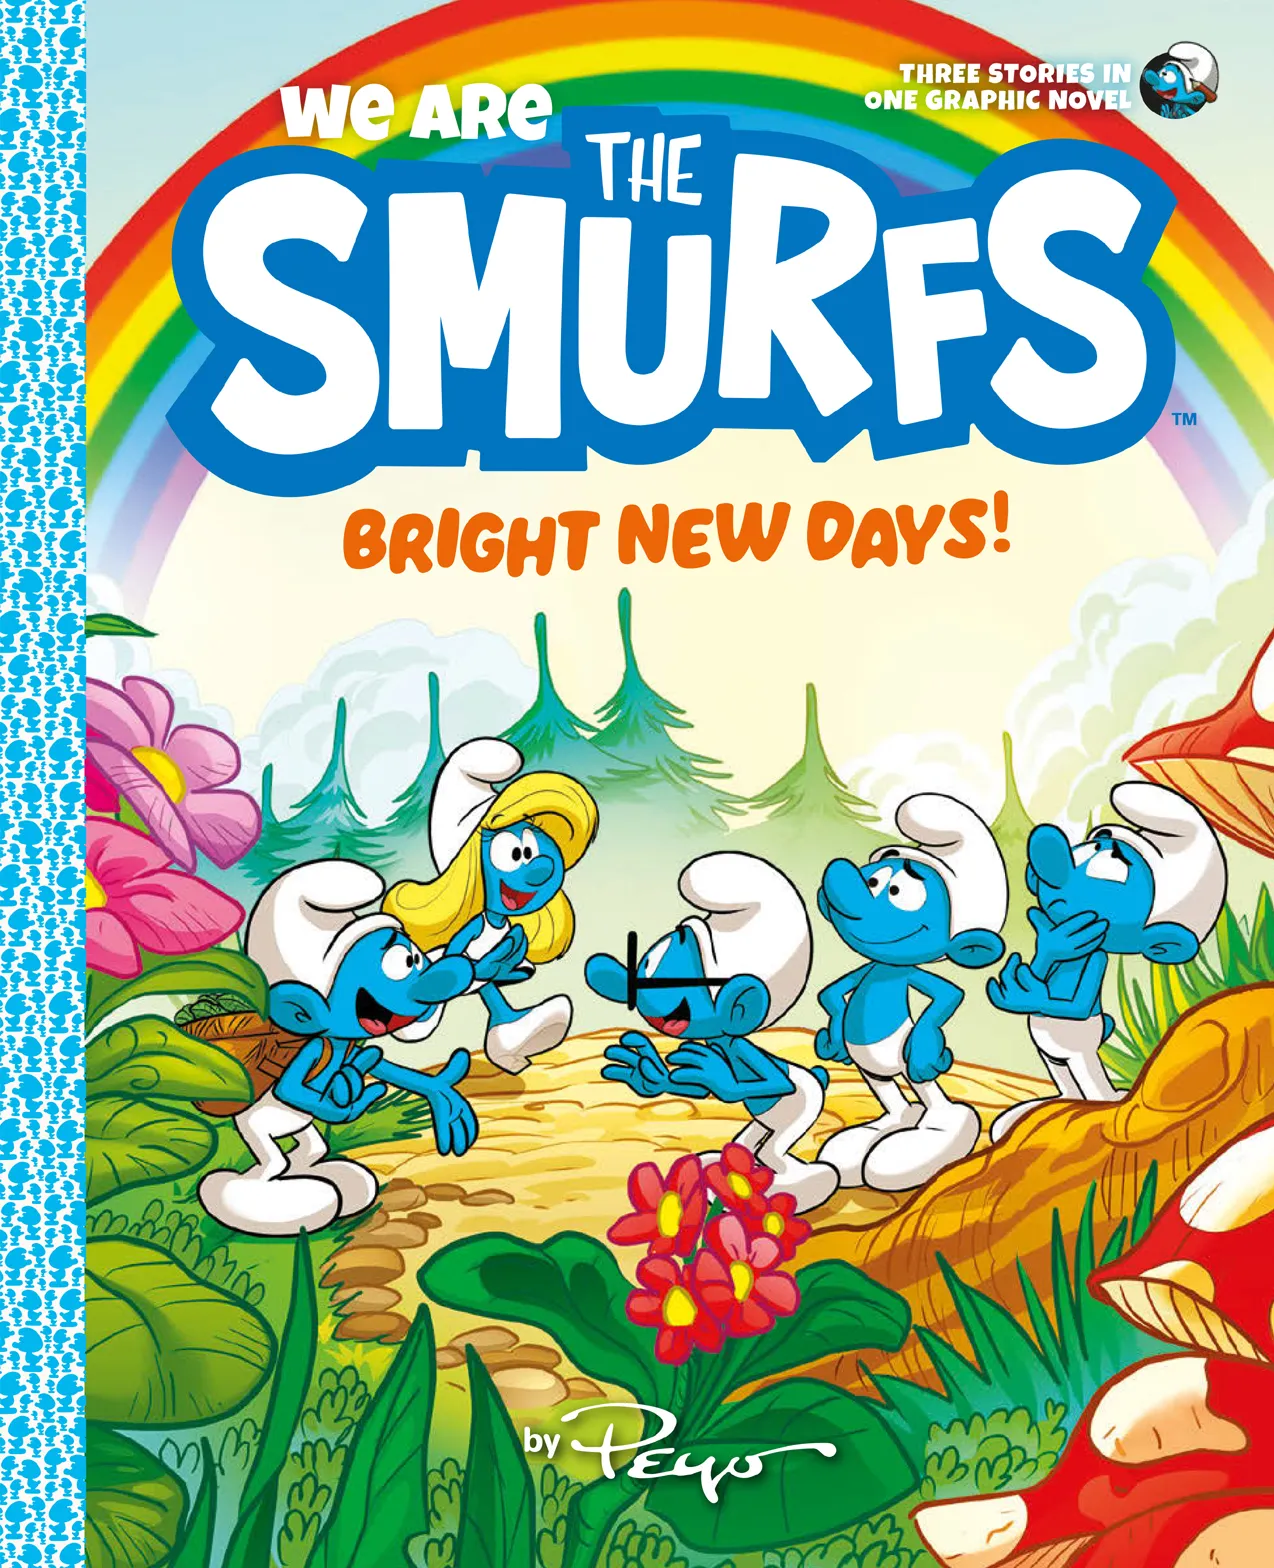 Bright New Days! (We Are the Smurfs #3)